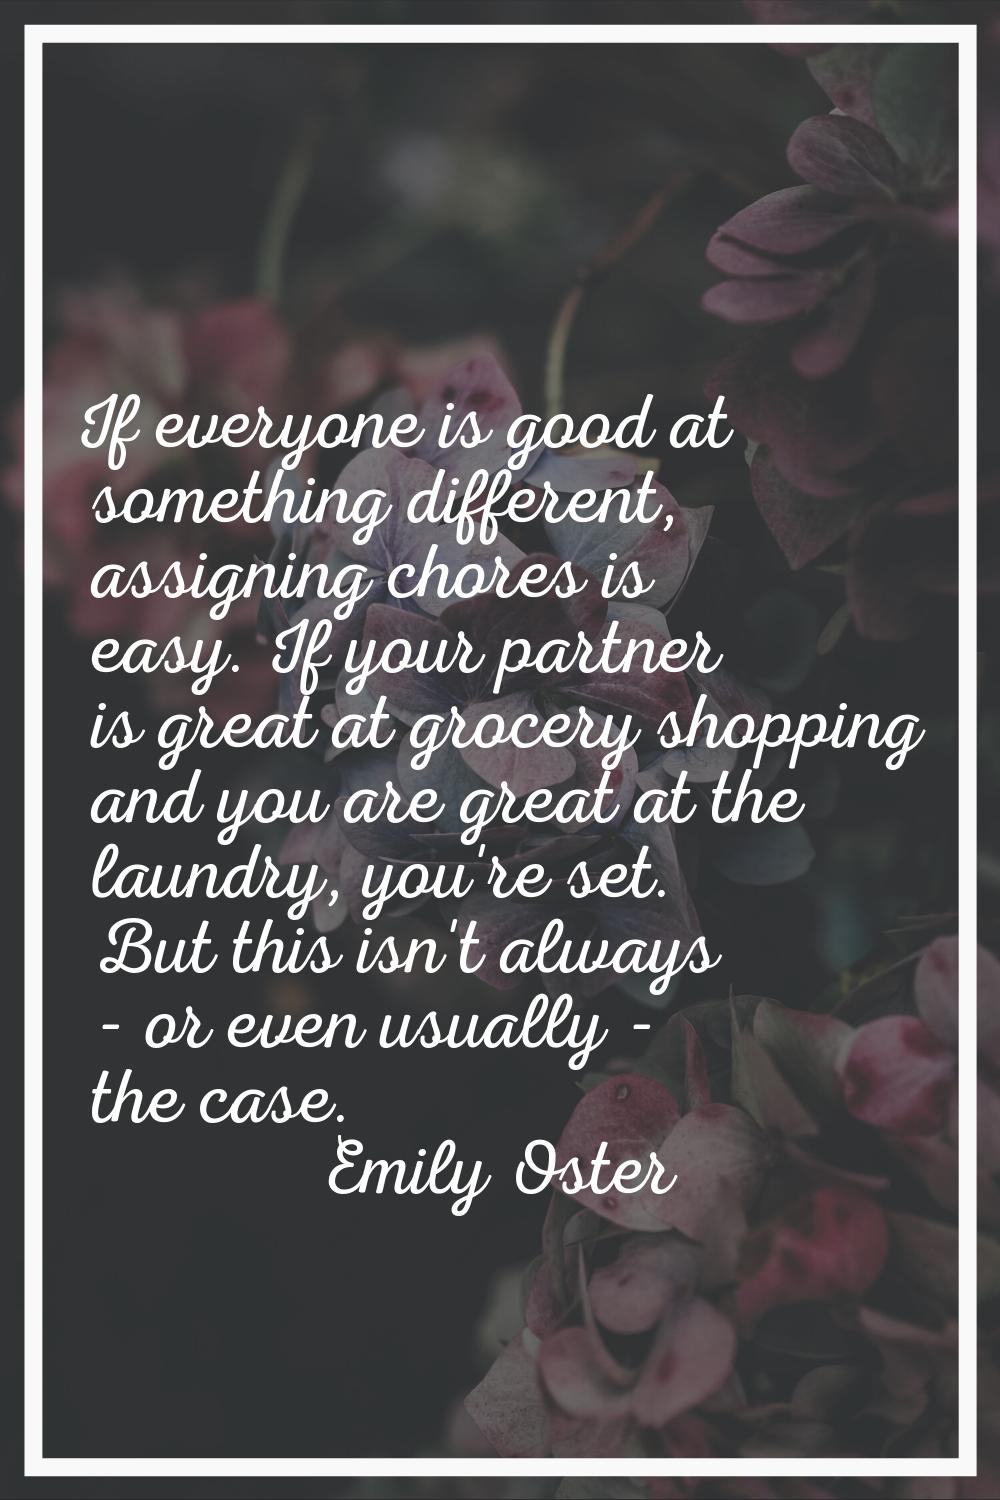 If everyone is good at something different, assigning chores is easy. If your partner is great at g